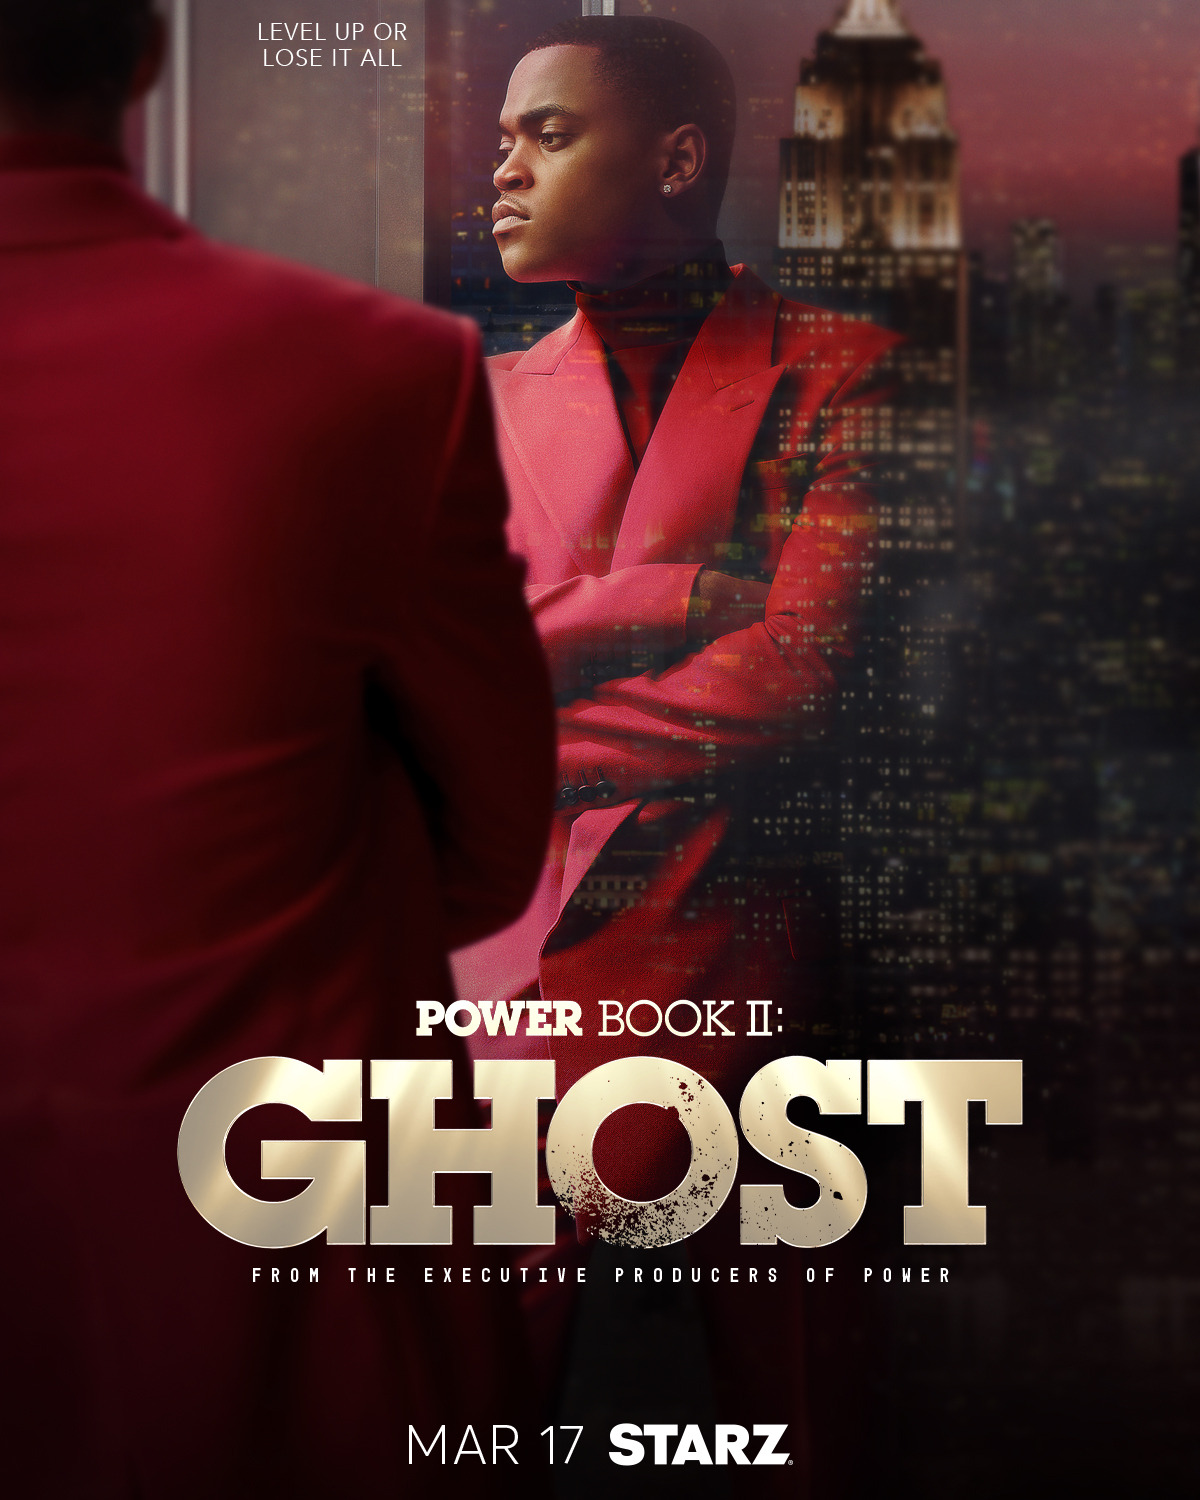 Extra Large TV Poster Image for Power Book II: Ghost (#13 of 13)